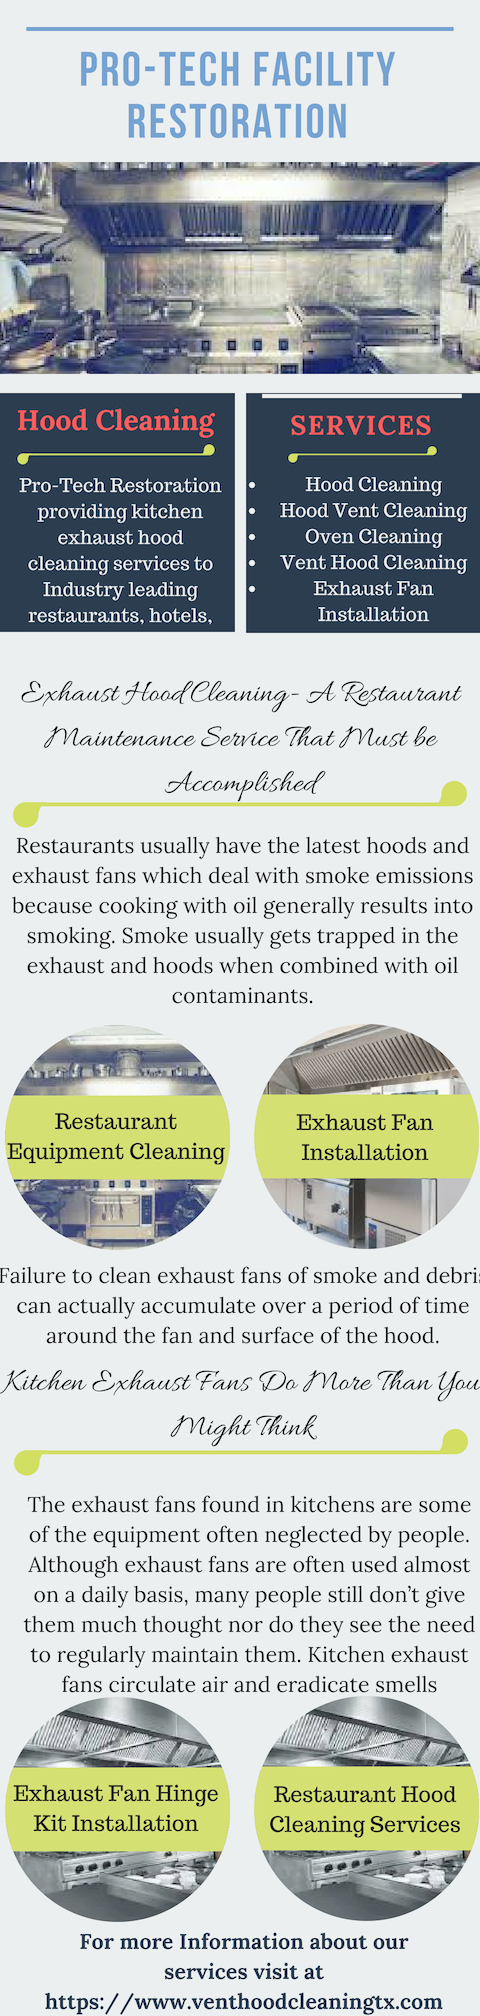 Exhaust Vent Hood Cleaning.jpg  by Venthoodcleaningtx